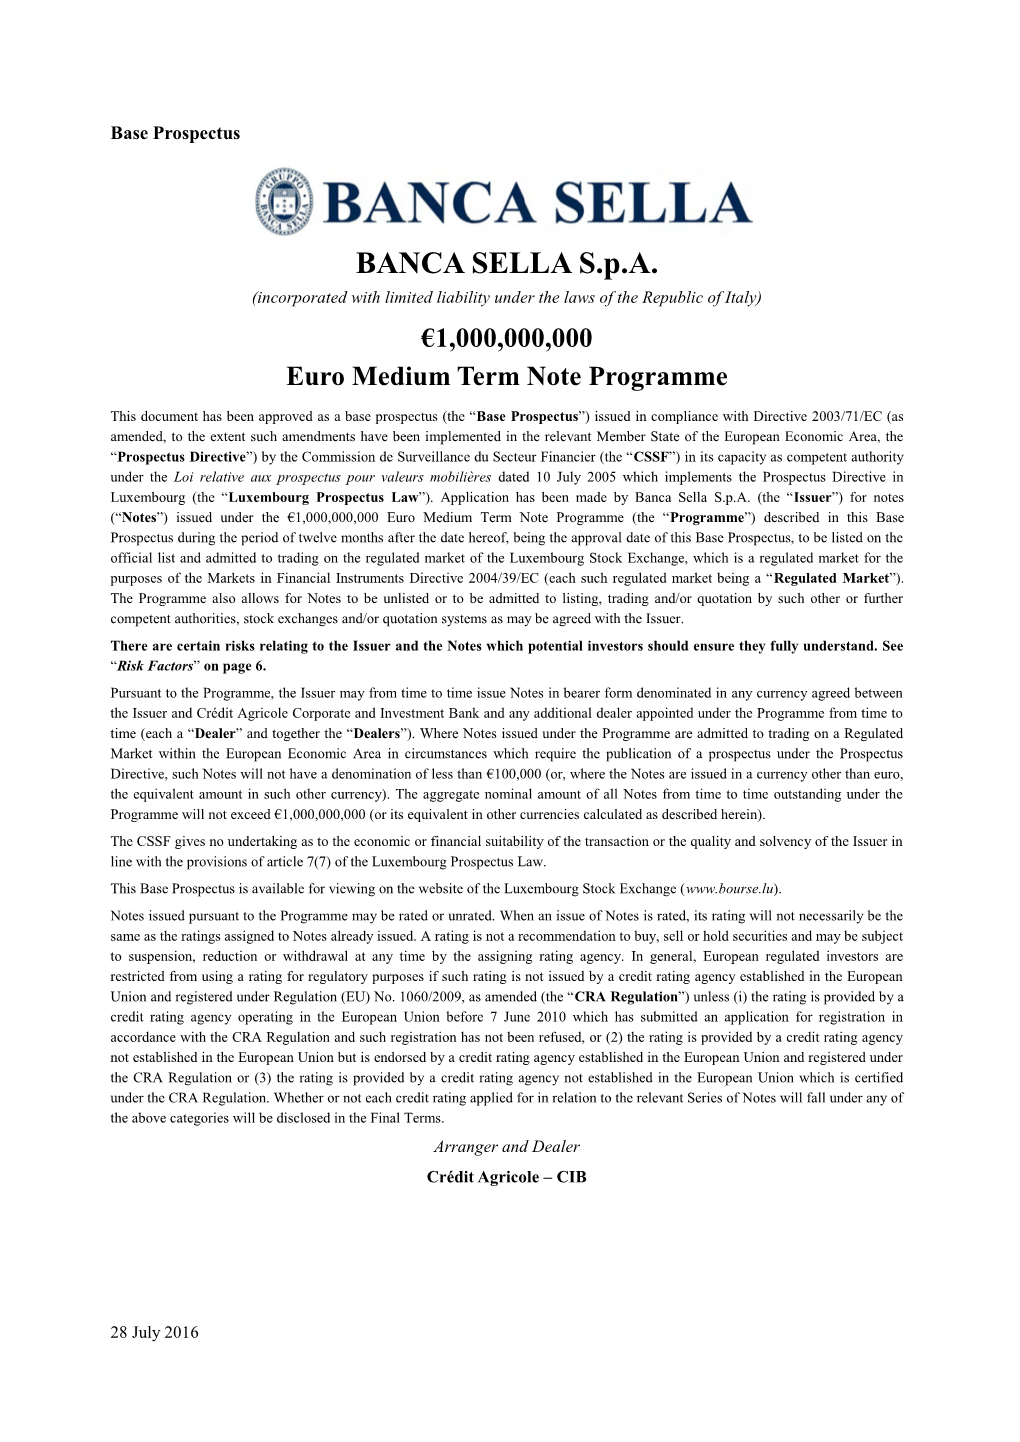 BANCA SELLA S.P.A. (Incorporated with Limited Liability Under the Laws of the Republic of Italy) €1,000,000,000 Euro Medium Term Note Programme